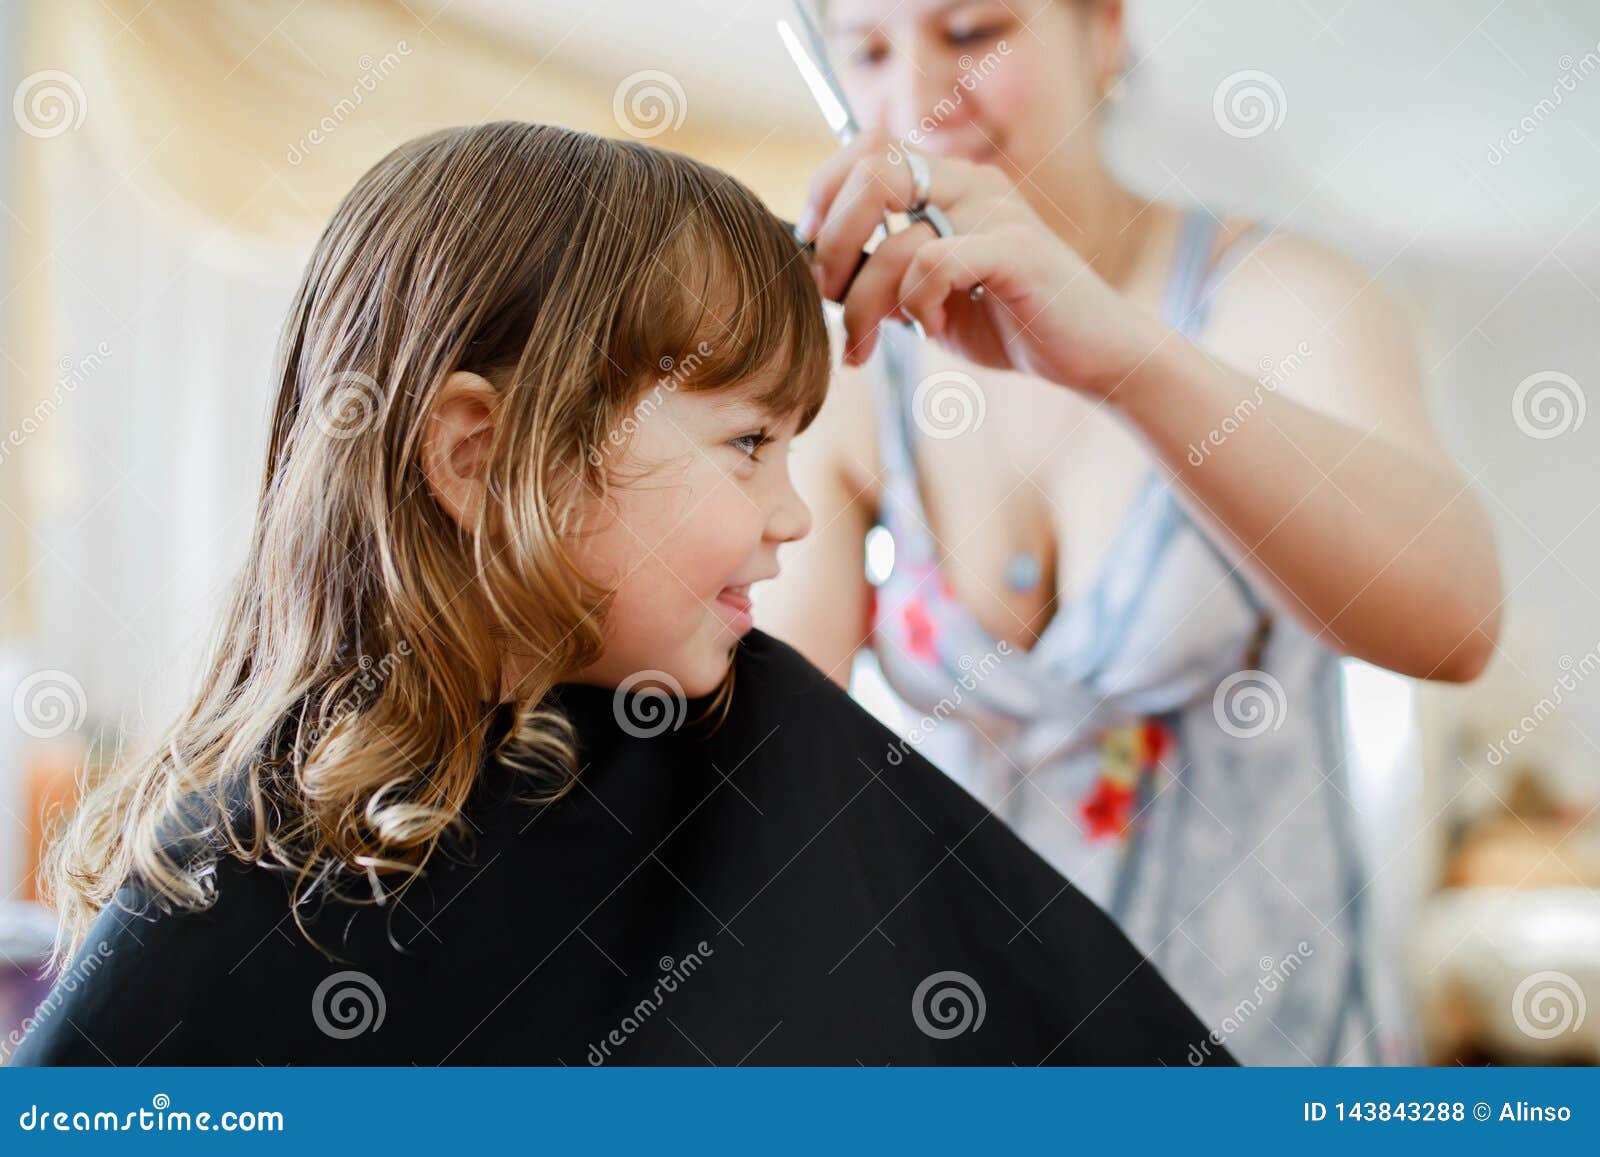 Cute Little Blonde Curly Girl at the Beauty Salon Stock Photo - Image of  experiment, enjoy: 143843288